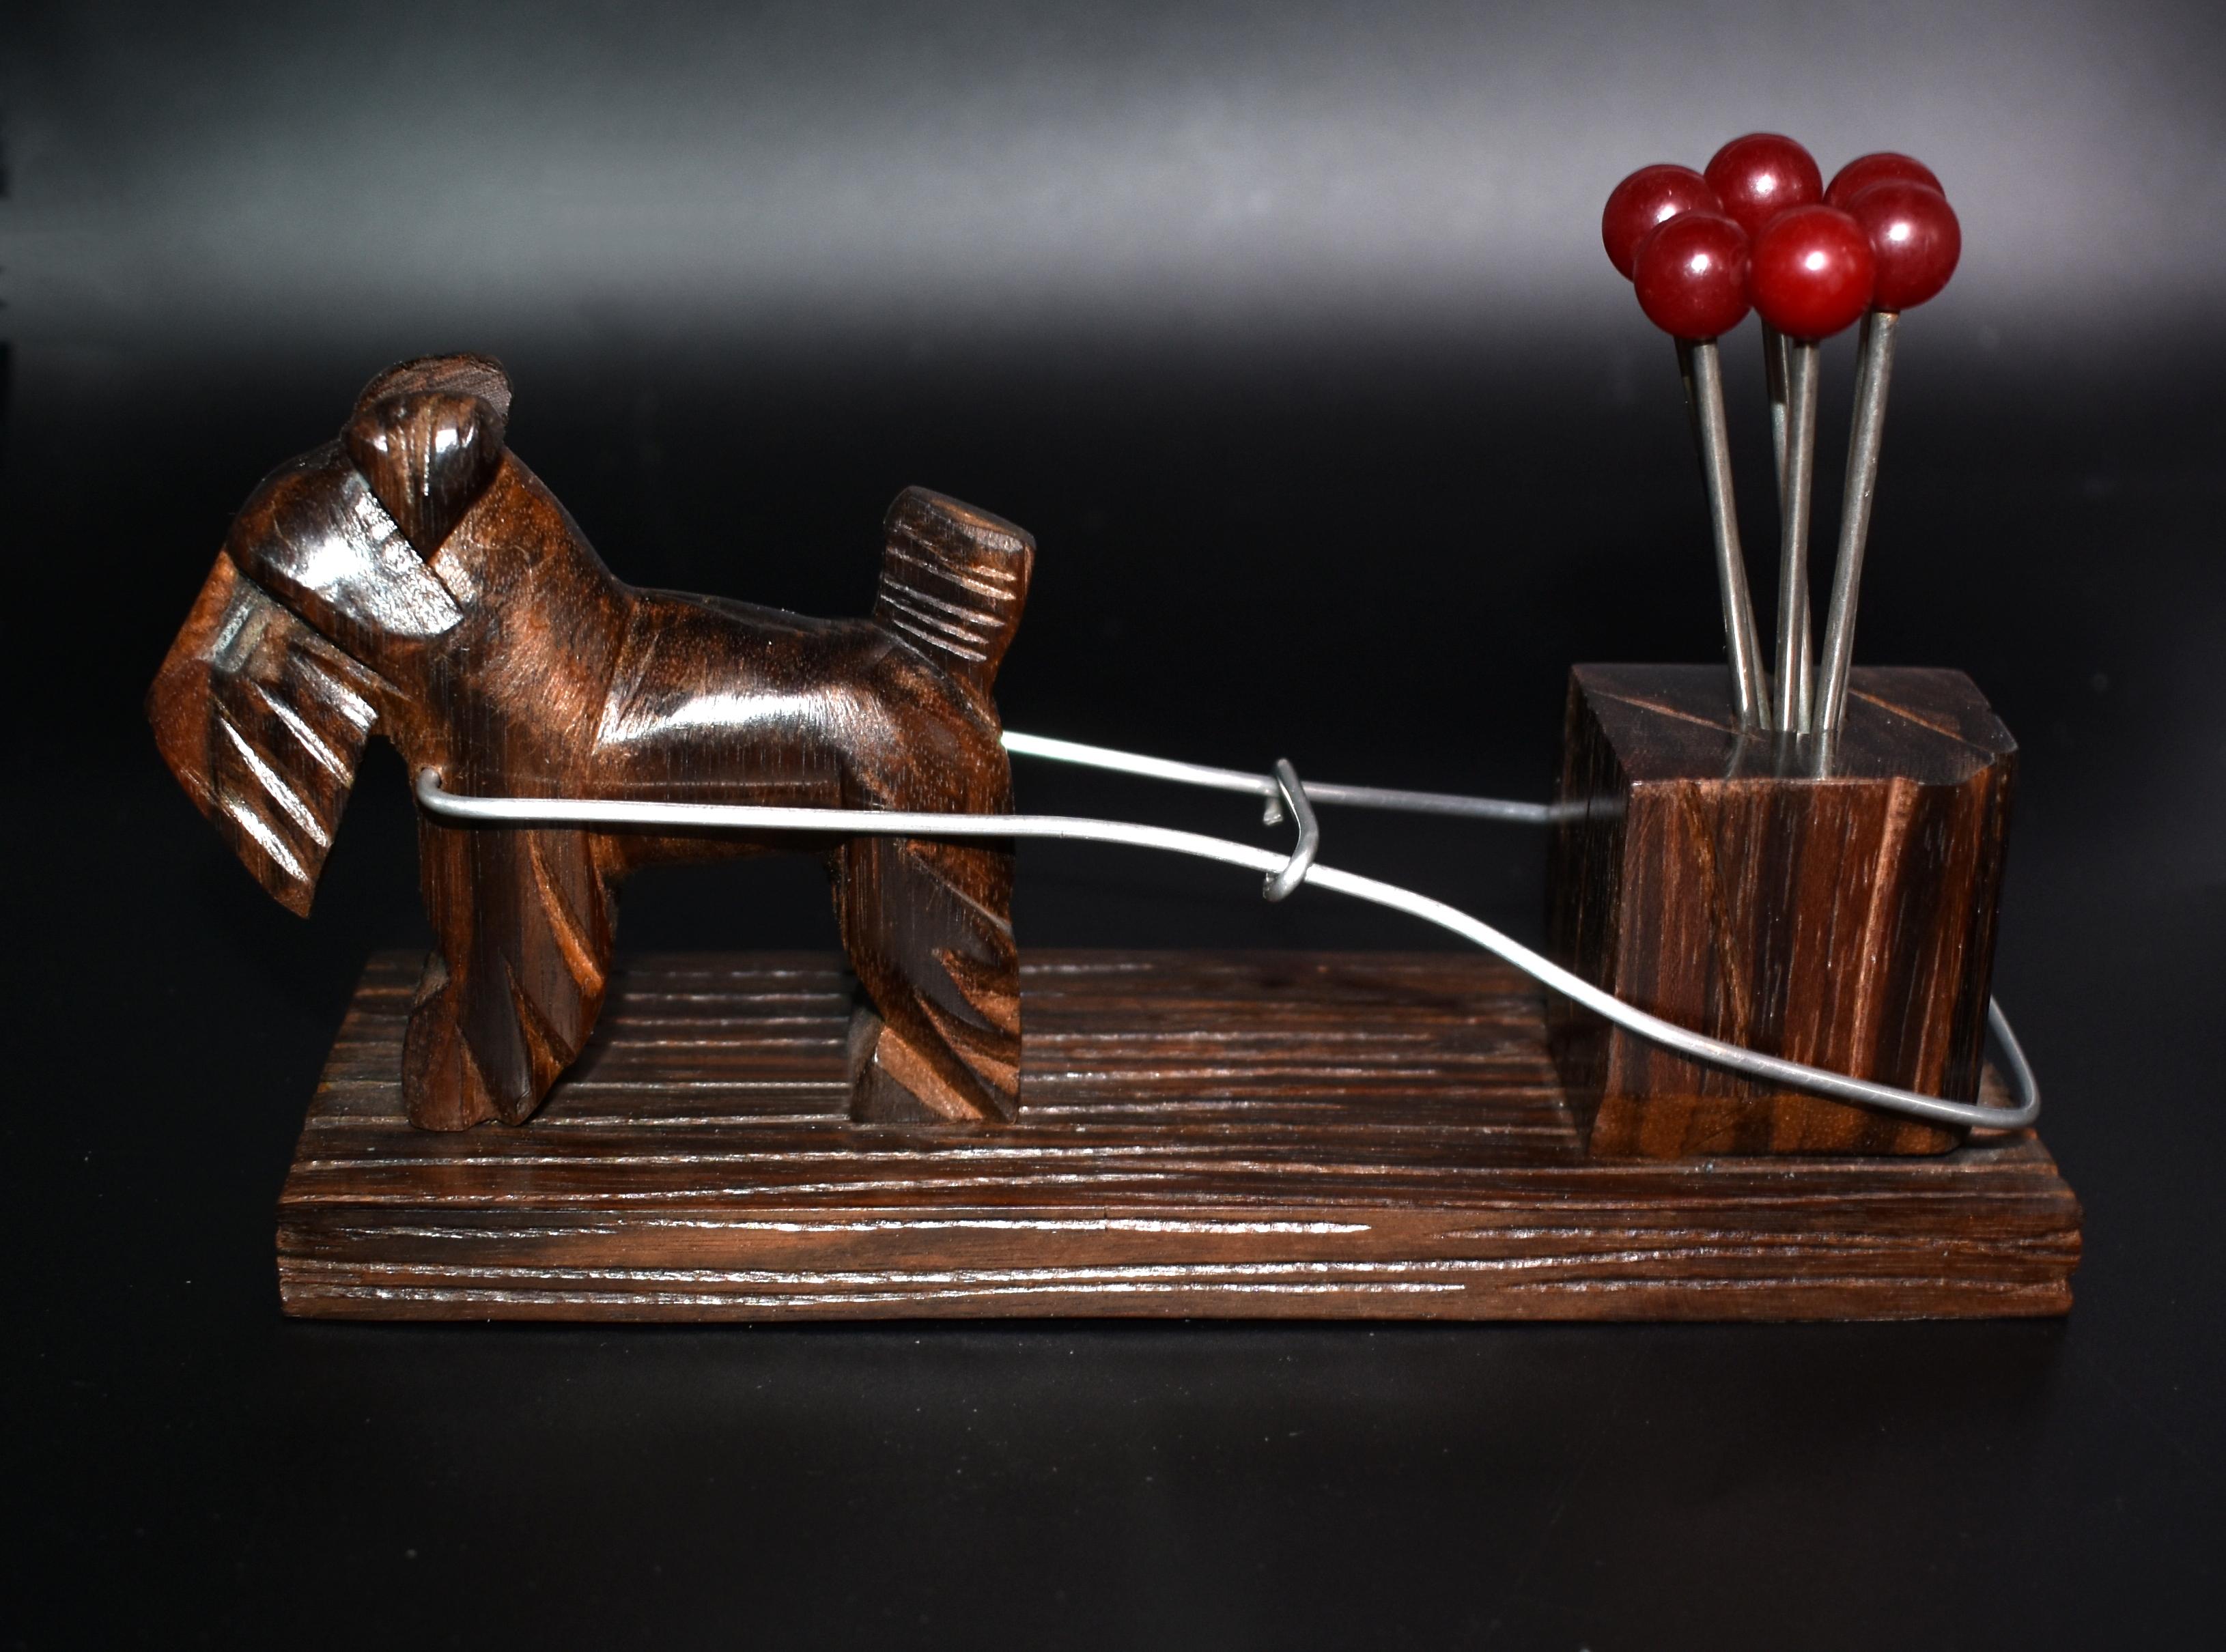 A rare novelty 1930s cocktail stick set originating from France. Features a harnessed Scottie dog 'west highland terrier ' pulling along a trunk of wood which is carrying a group of cherry red colored Bakelite cocktail sticks with chromed metal